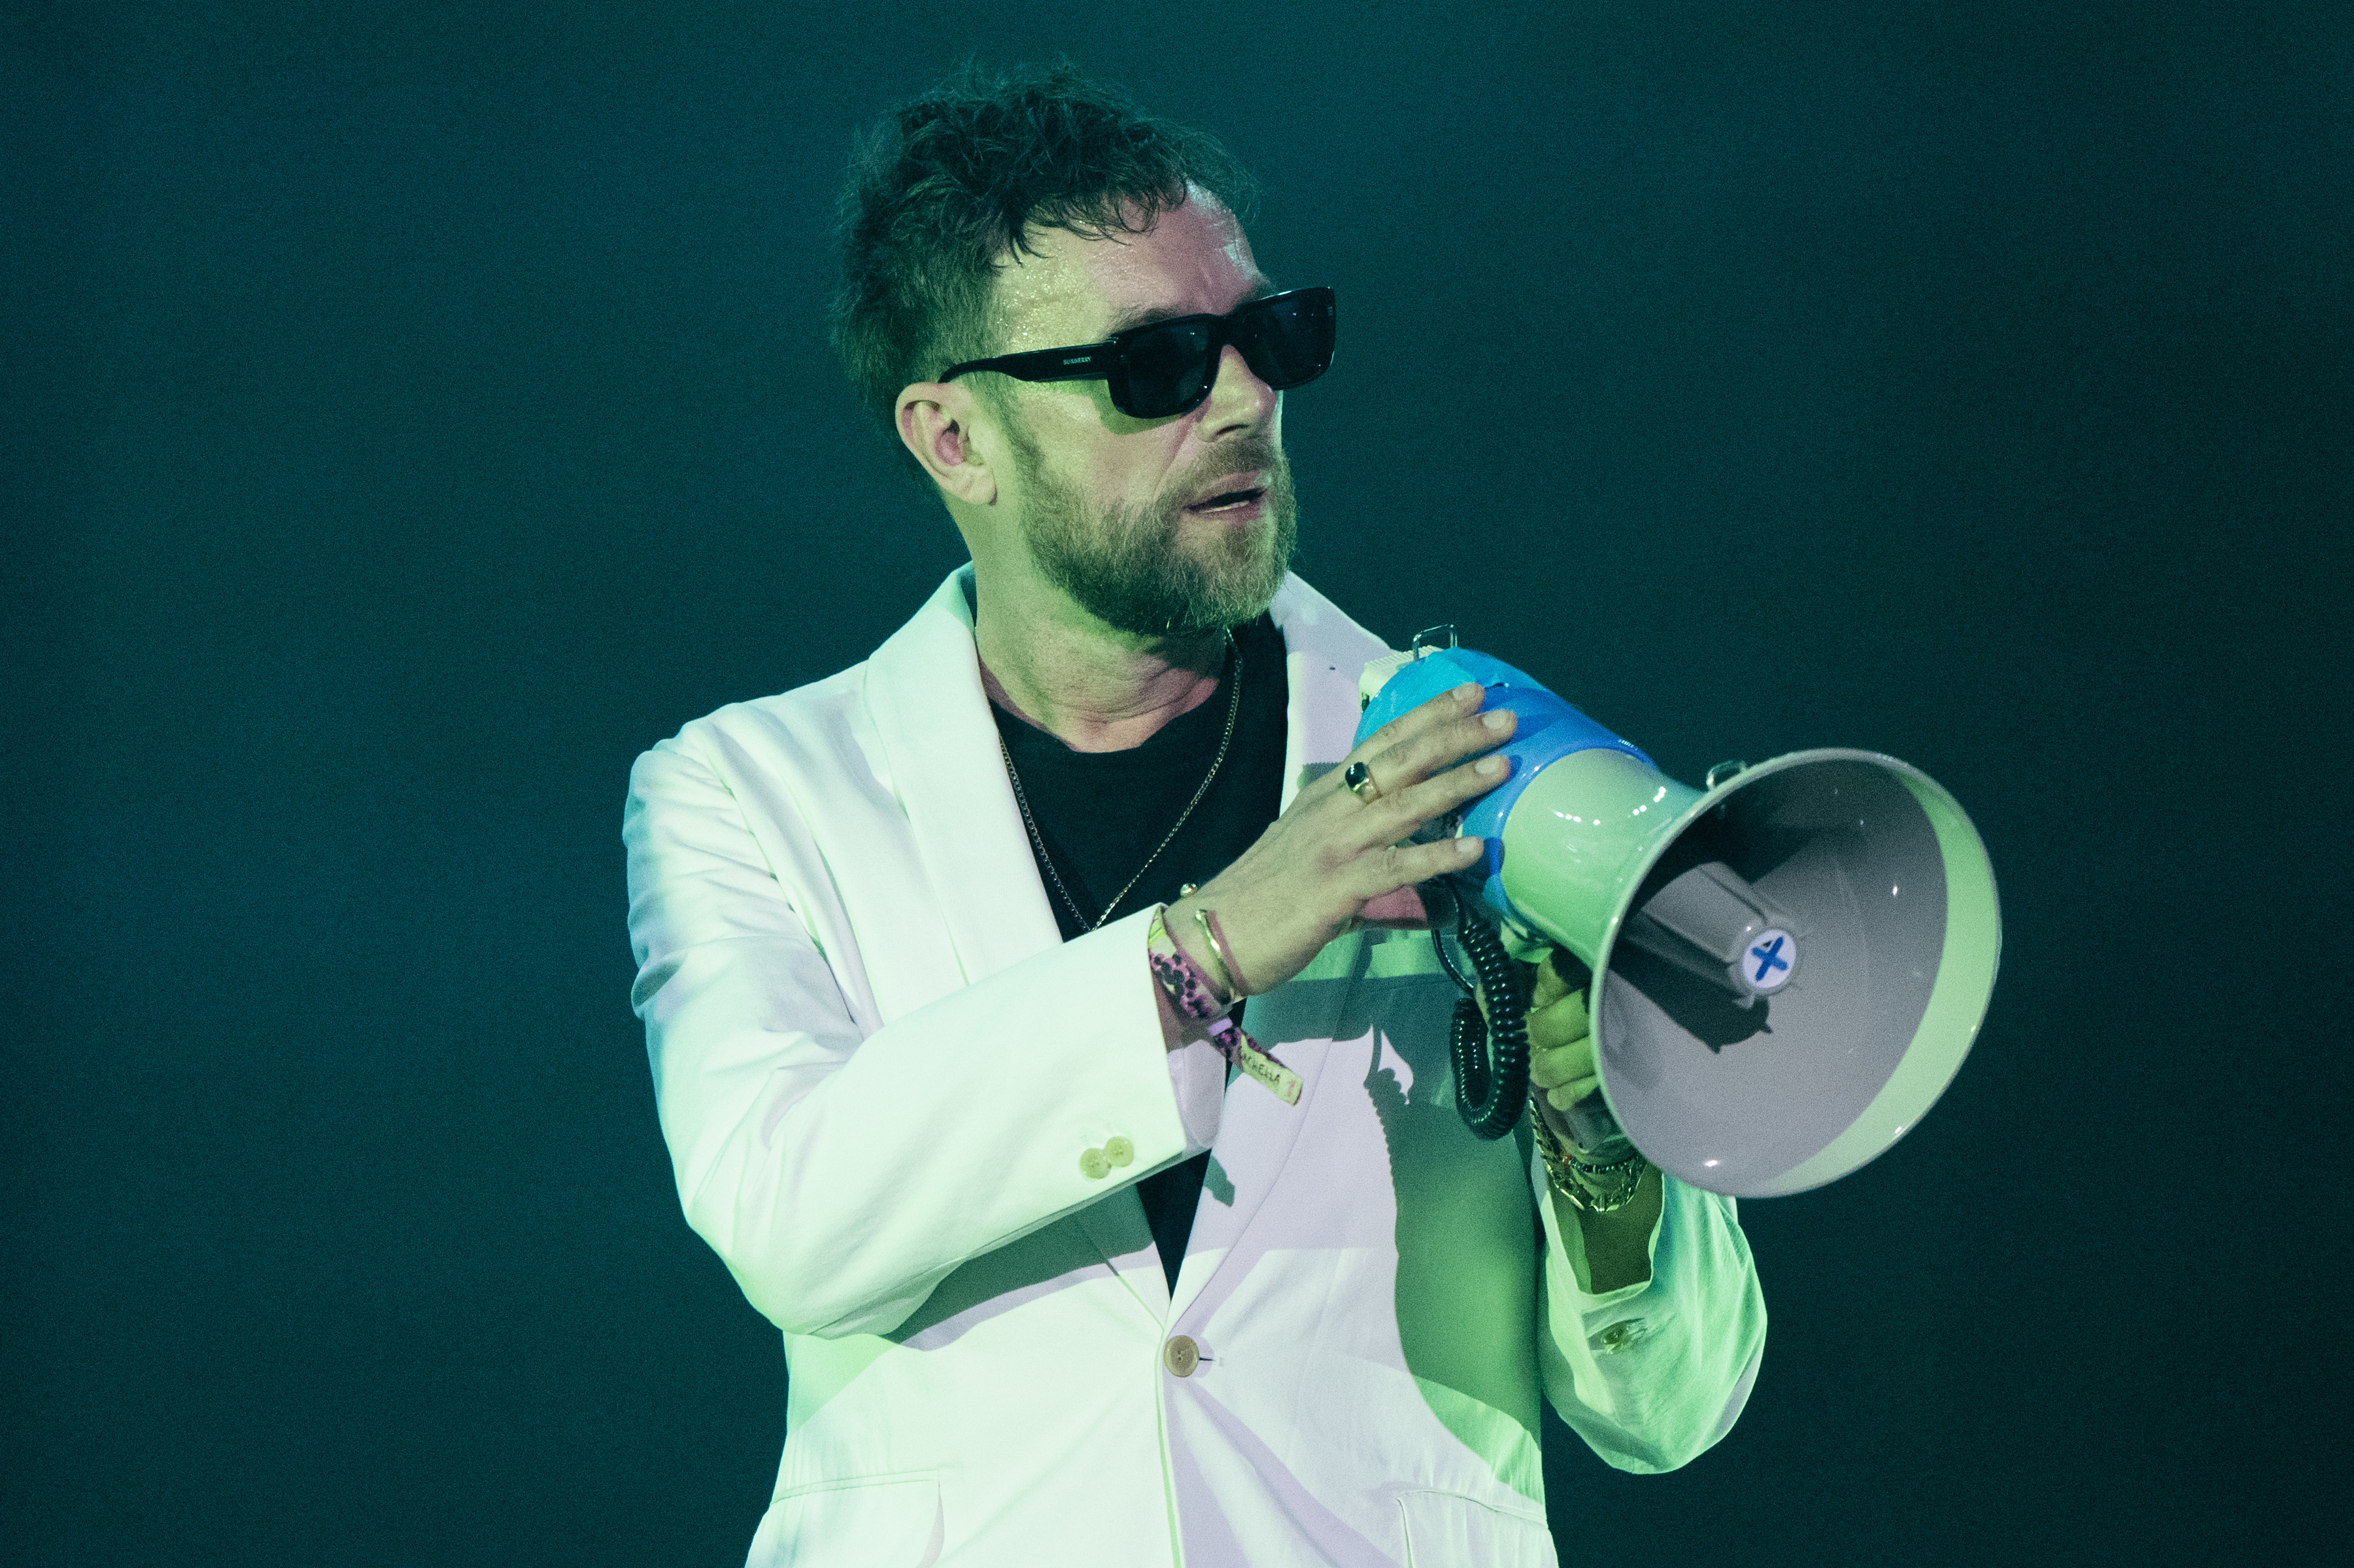 Music artist in a white suit speaks into a megaphone onstage